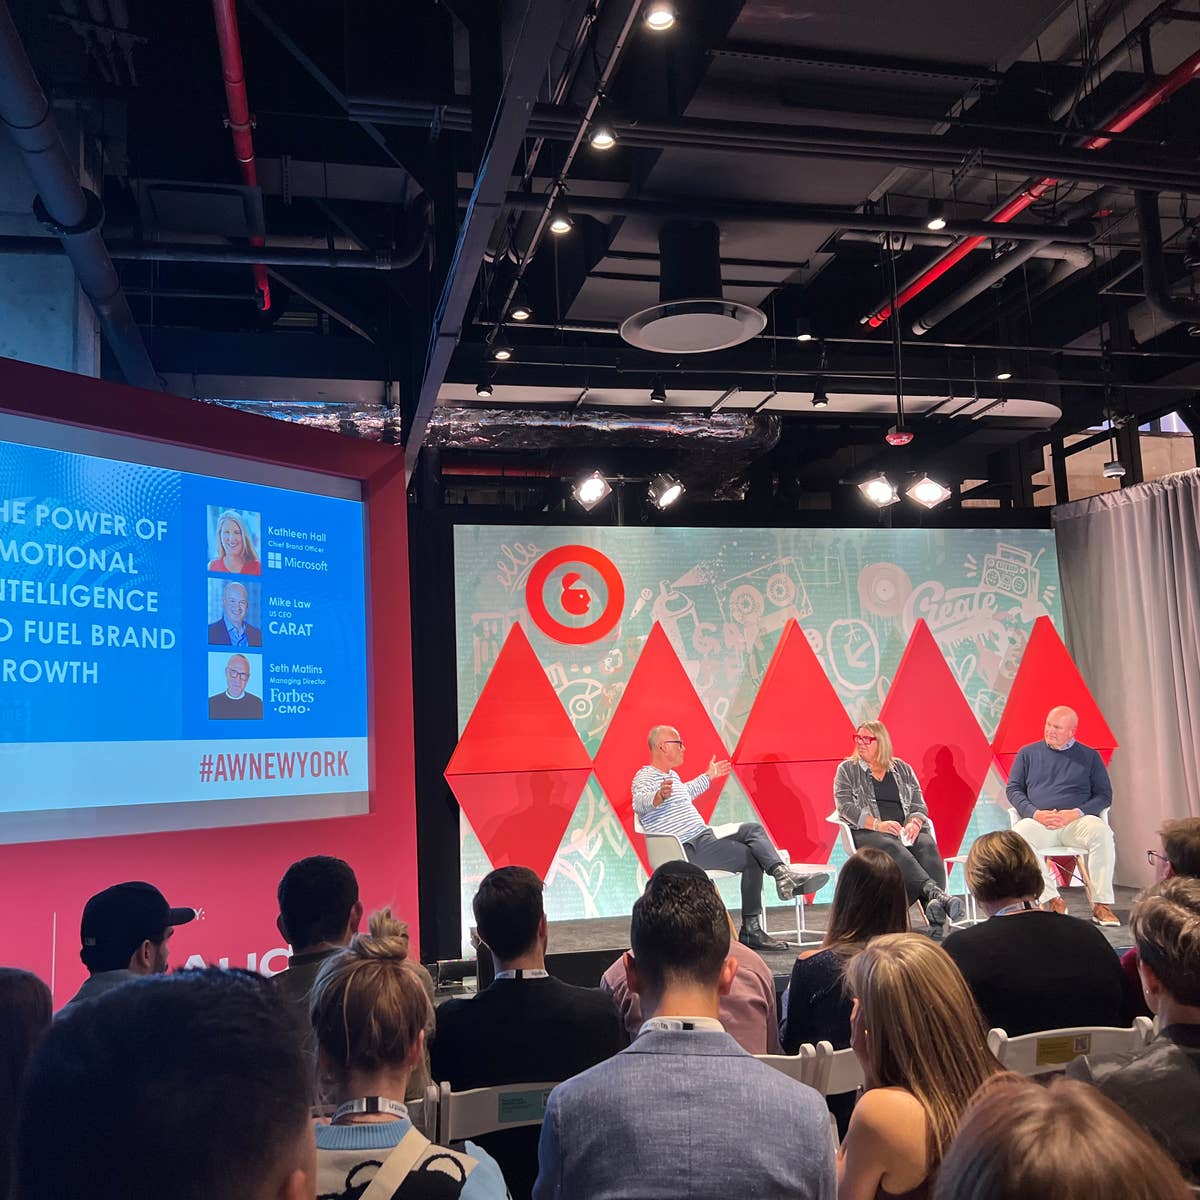 Carat US and Microsoft Discuss the Power of Emotional Intelligence to Fuel Brand Growth on Stage at Advertising Week New York 